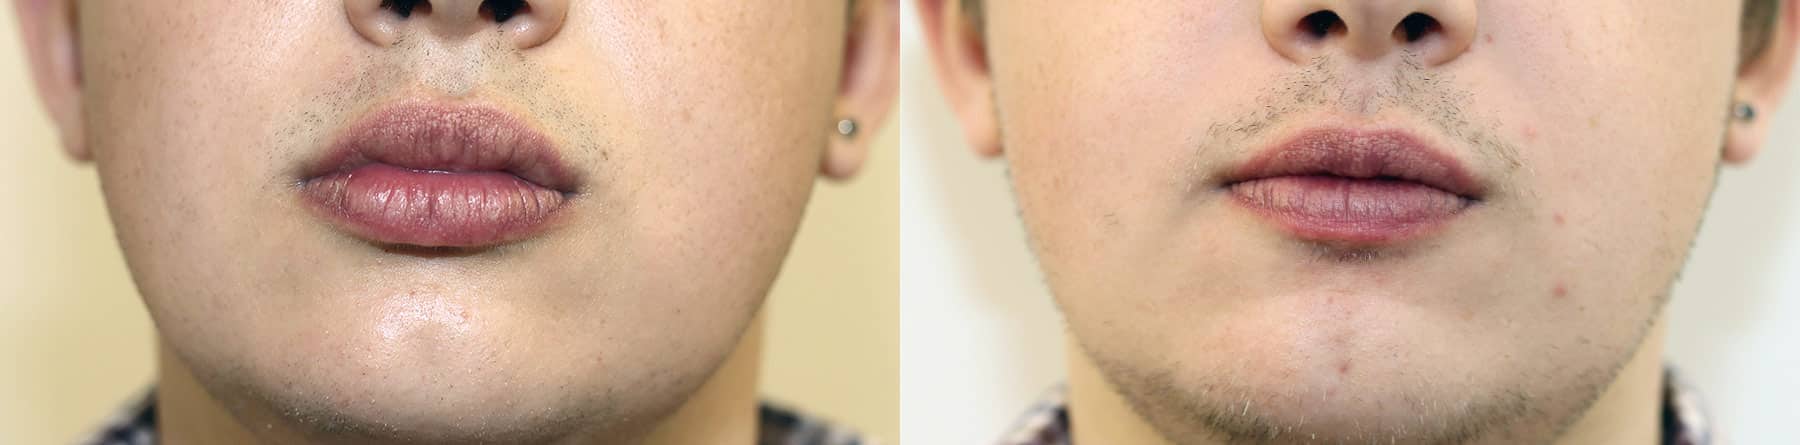 Lip Augmentation & Reduction Before & After Results in London